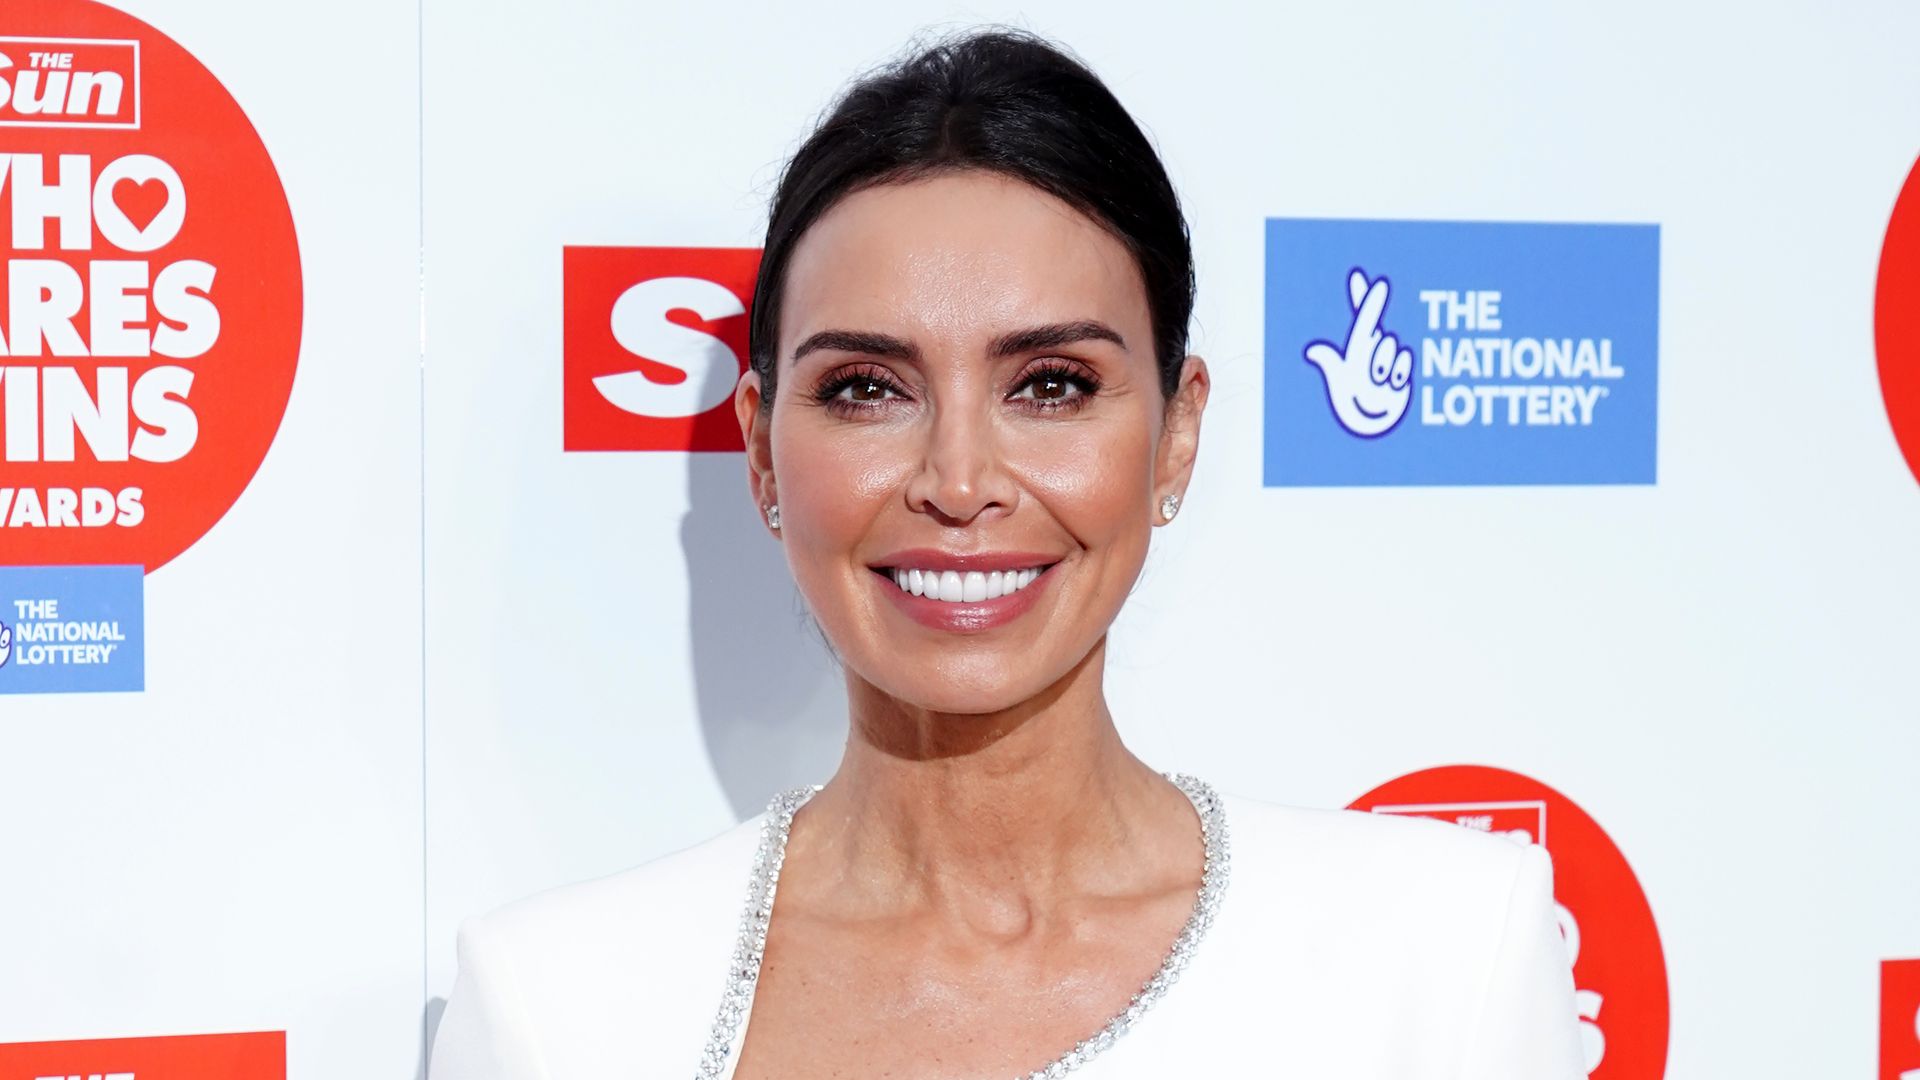 Loose Women's Christine Lampard looks ethereal in bridal white gown